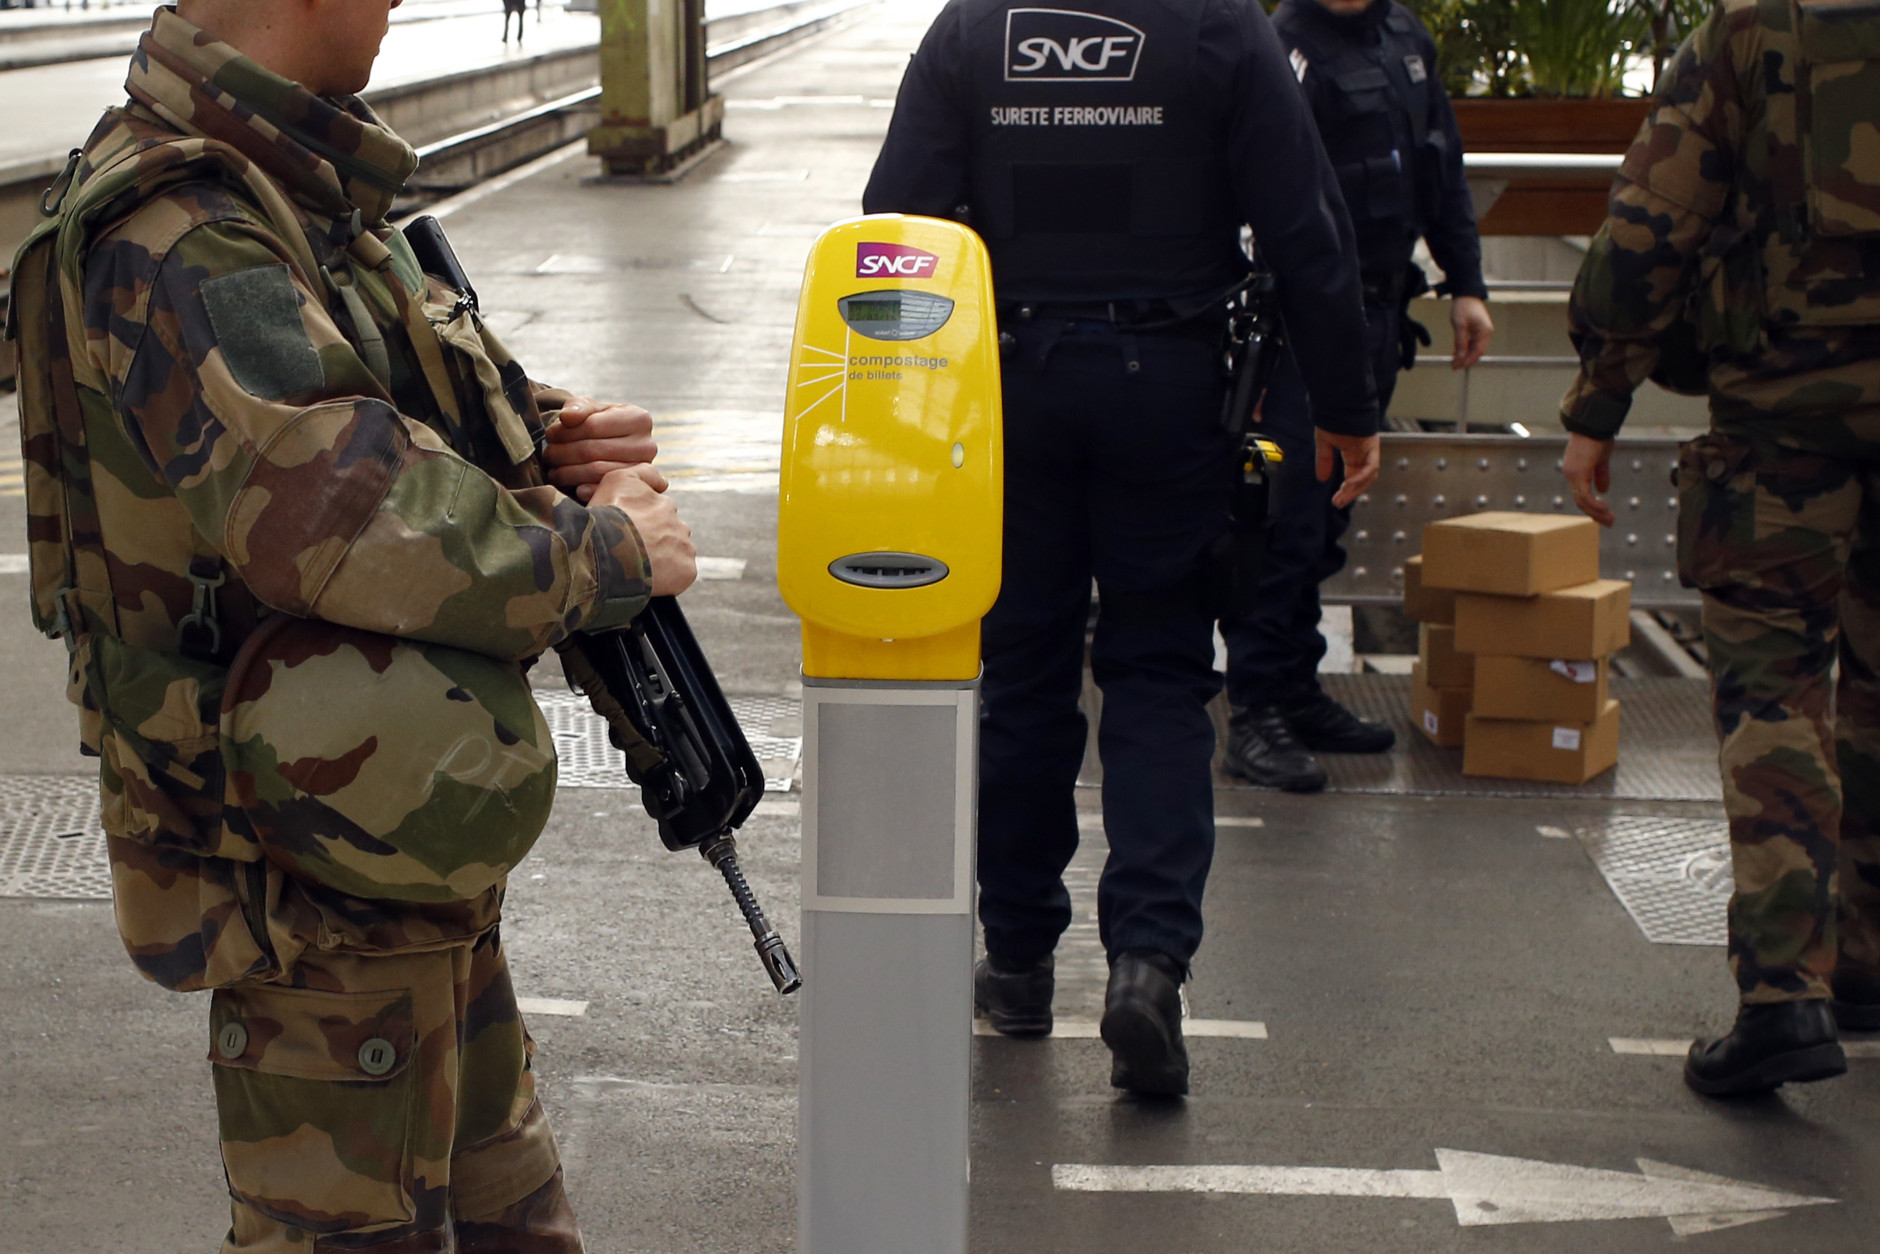 French soldiers check unattended boxes left on the platform at Gare De Lyon railway station in Paris, France, Tuesday, March 22, 2016. Authorities are tightening security at airports and on the streets of European cities after attacks on the Brussels airport and subways system that killed at least one person and injured many others. (AP Photo/Francois Mori)